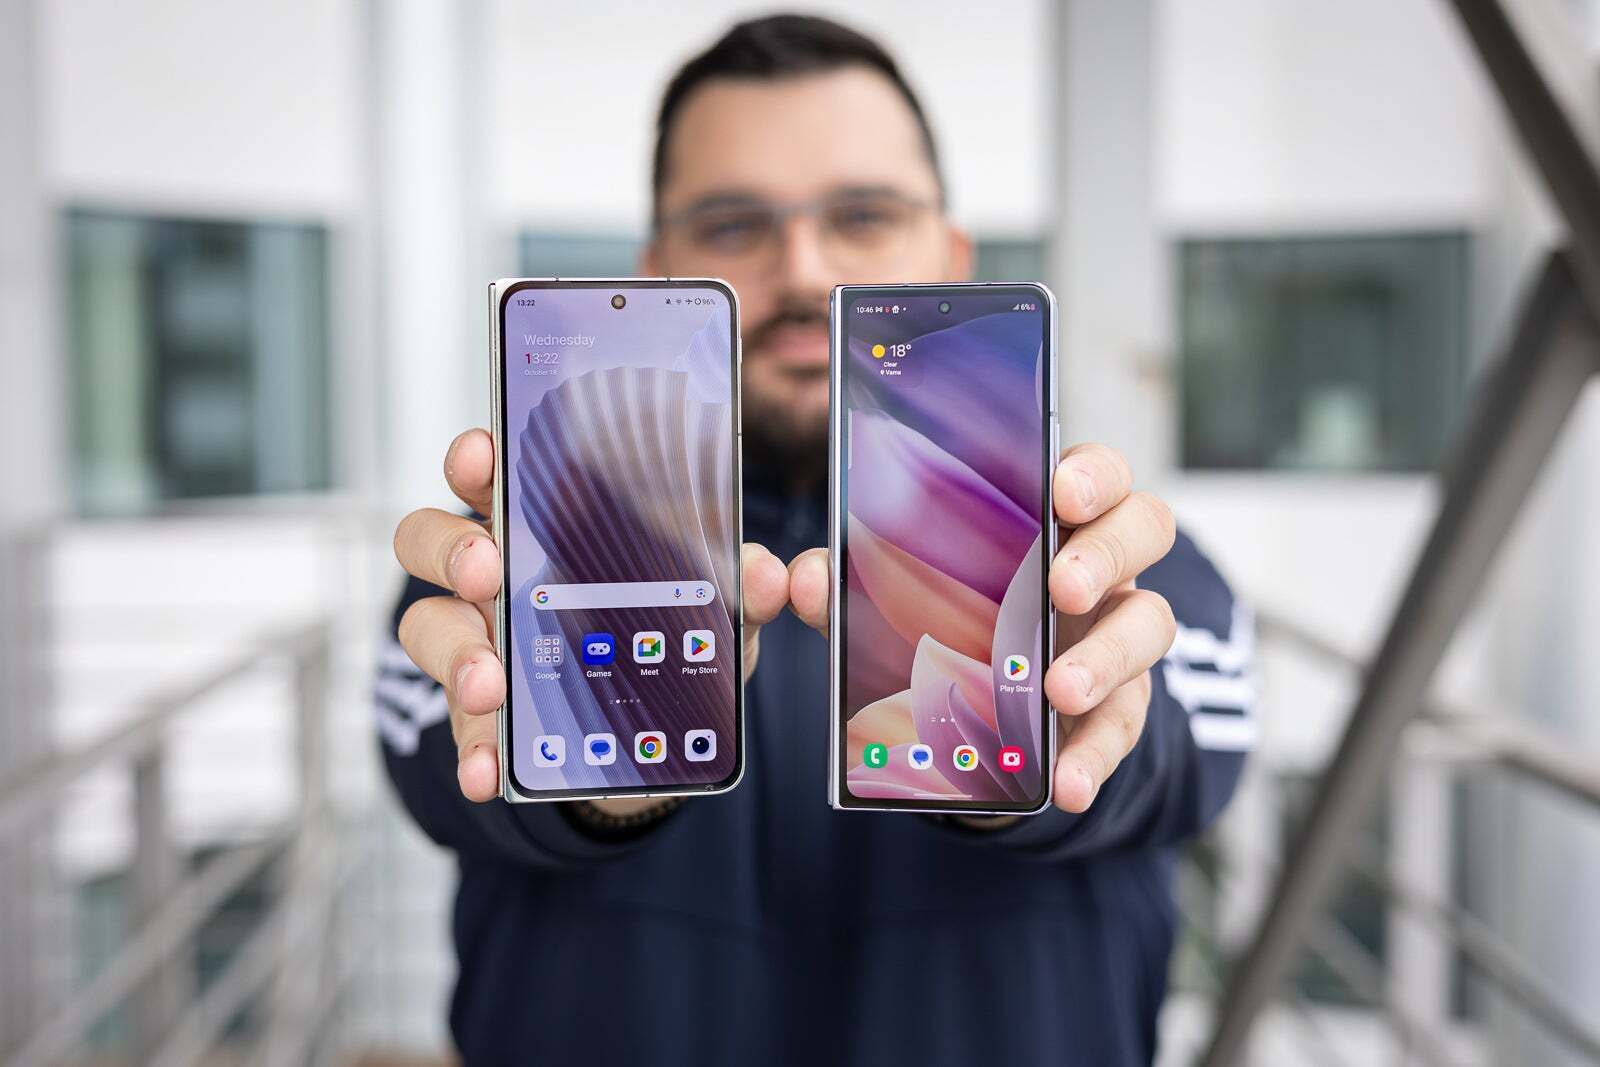 Z Fold 5 (right) next to the wider OnePlus Open - "I wanted it from the start!" - Z Fold 5 user reacts to Galaxy Z Fold 6 leaks